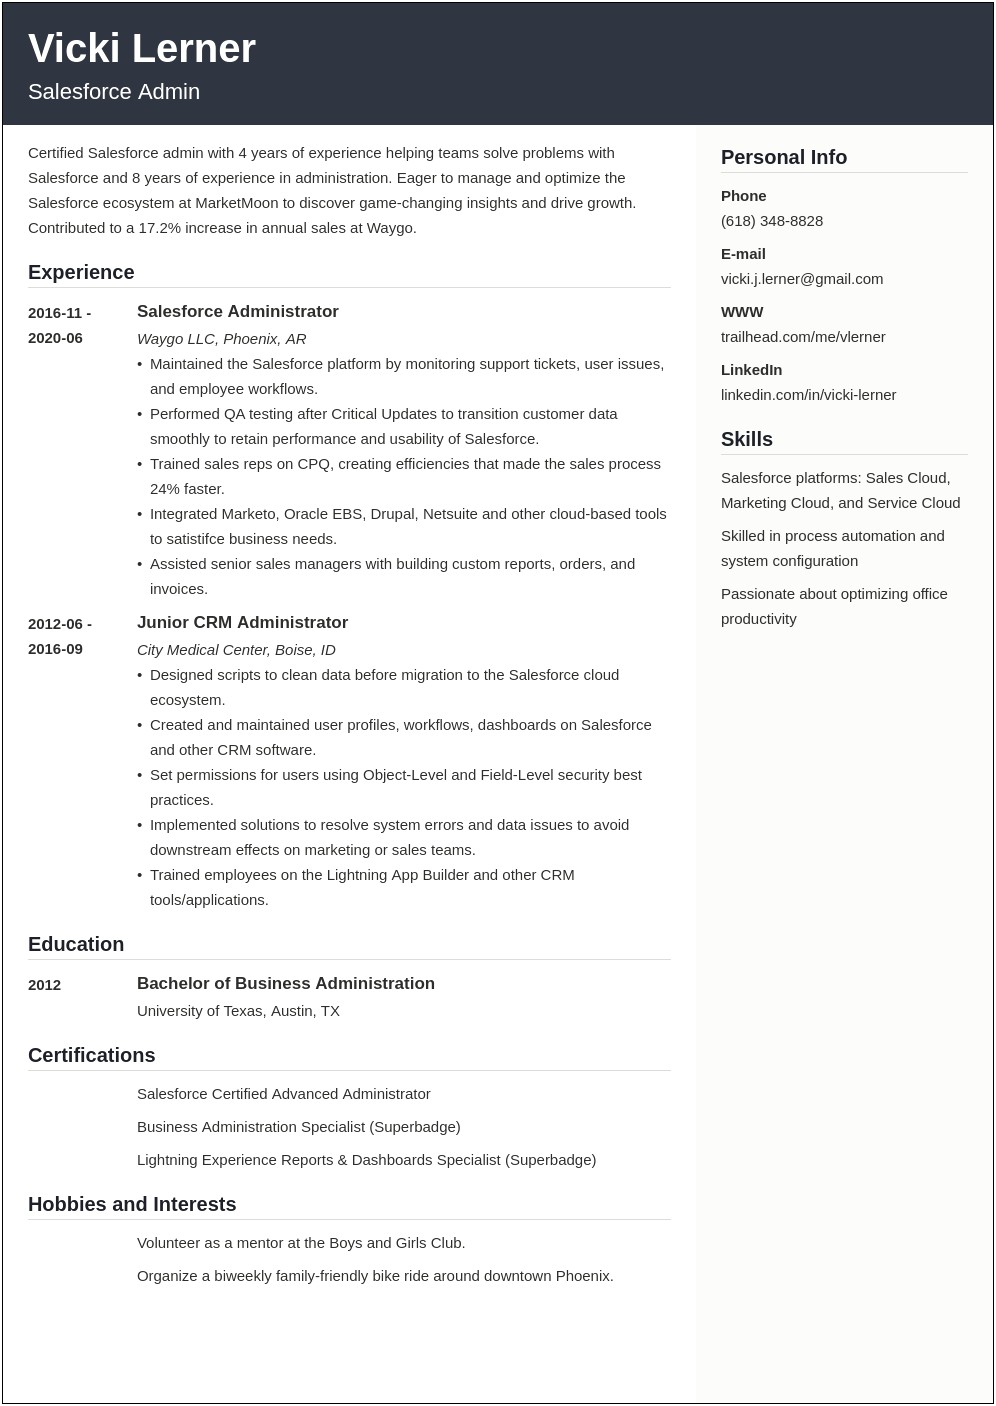 Salesforce Admin Resume For 4 Years Experience